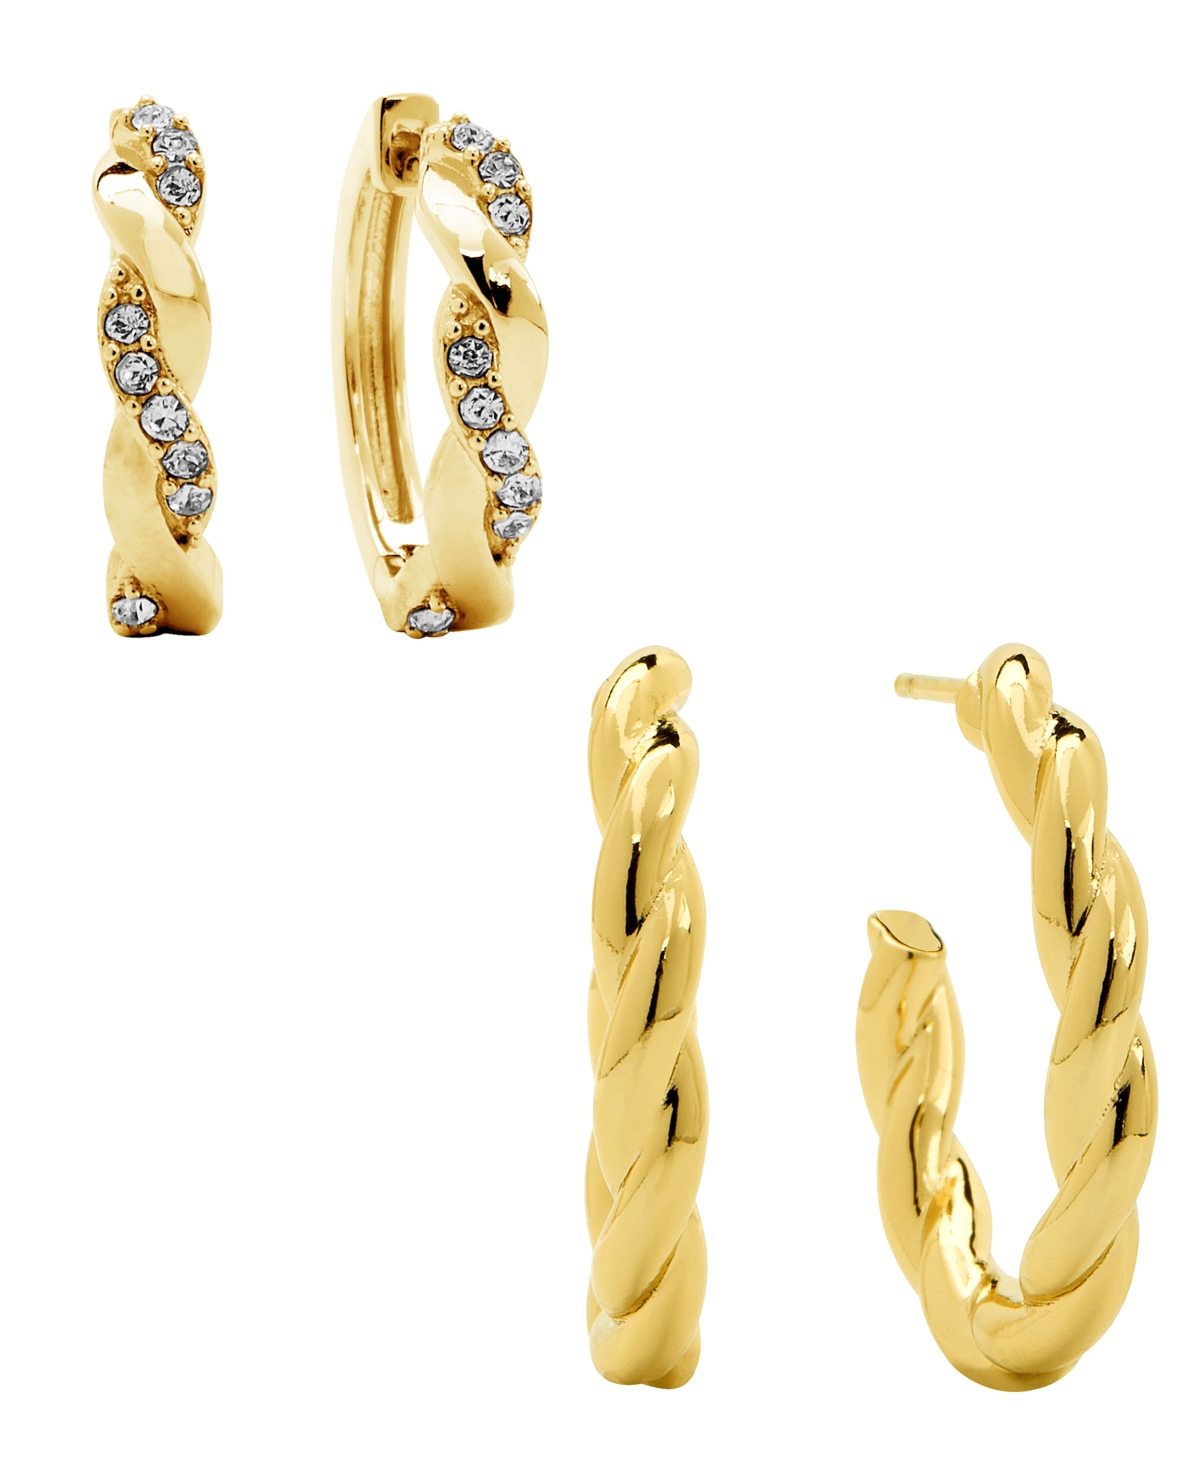 And Now This Women's Crystal Twist Hoop Earrings Set, 4 Pieces In Gold Plated